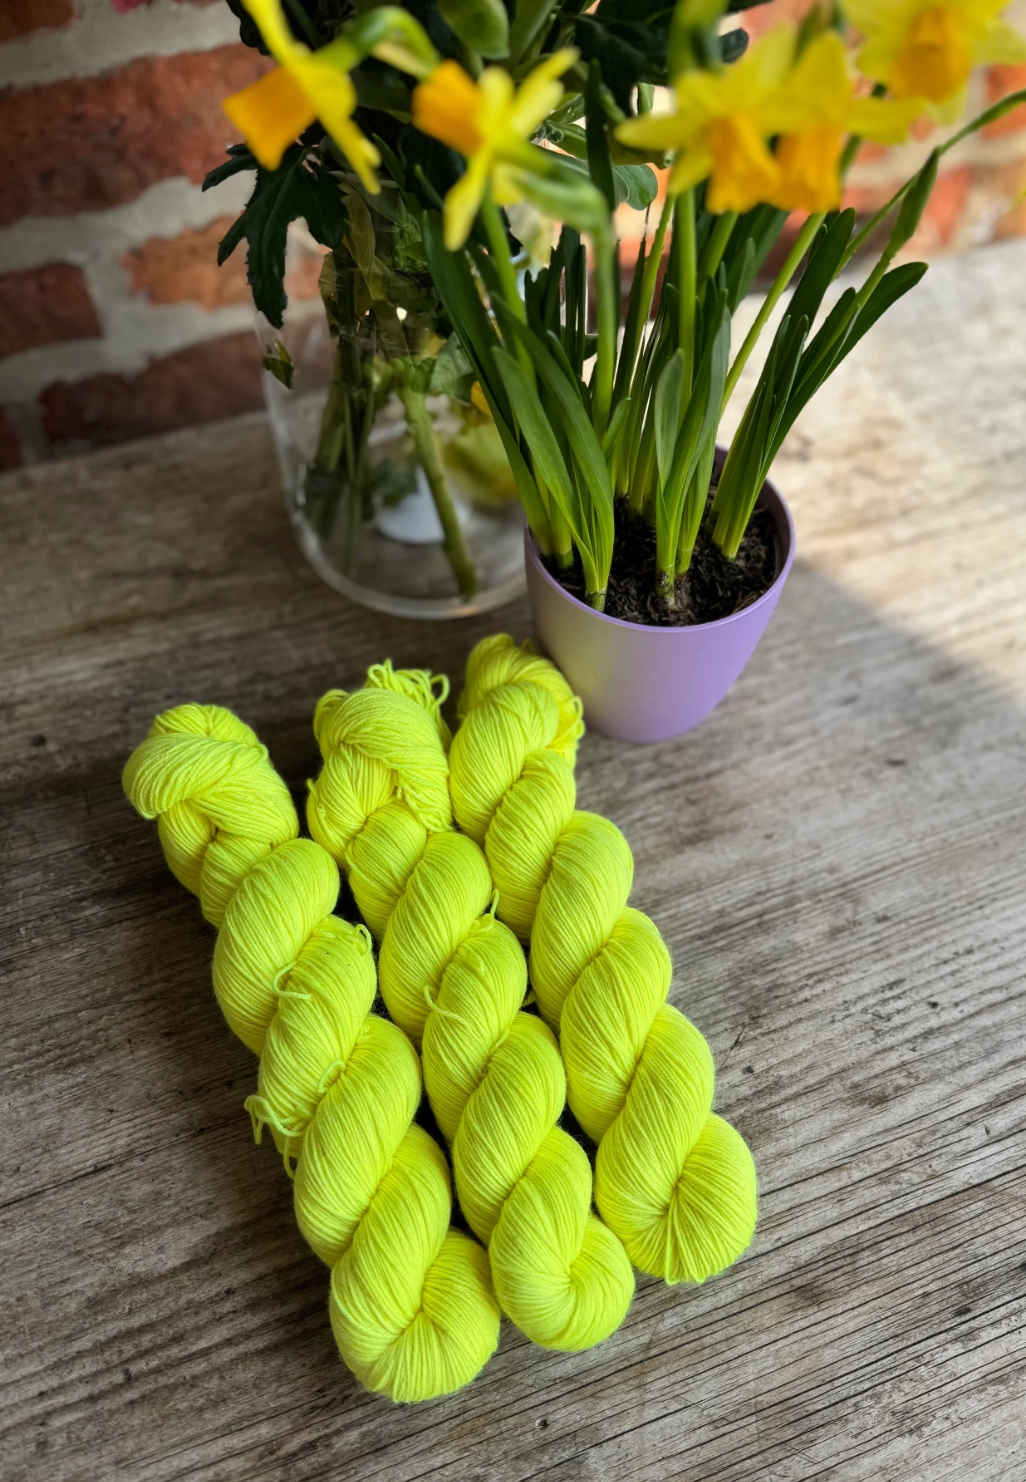 Dyed to order - Fluorescent Yellow